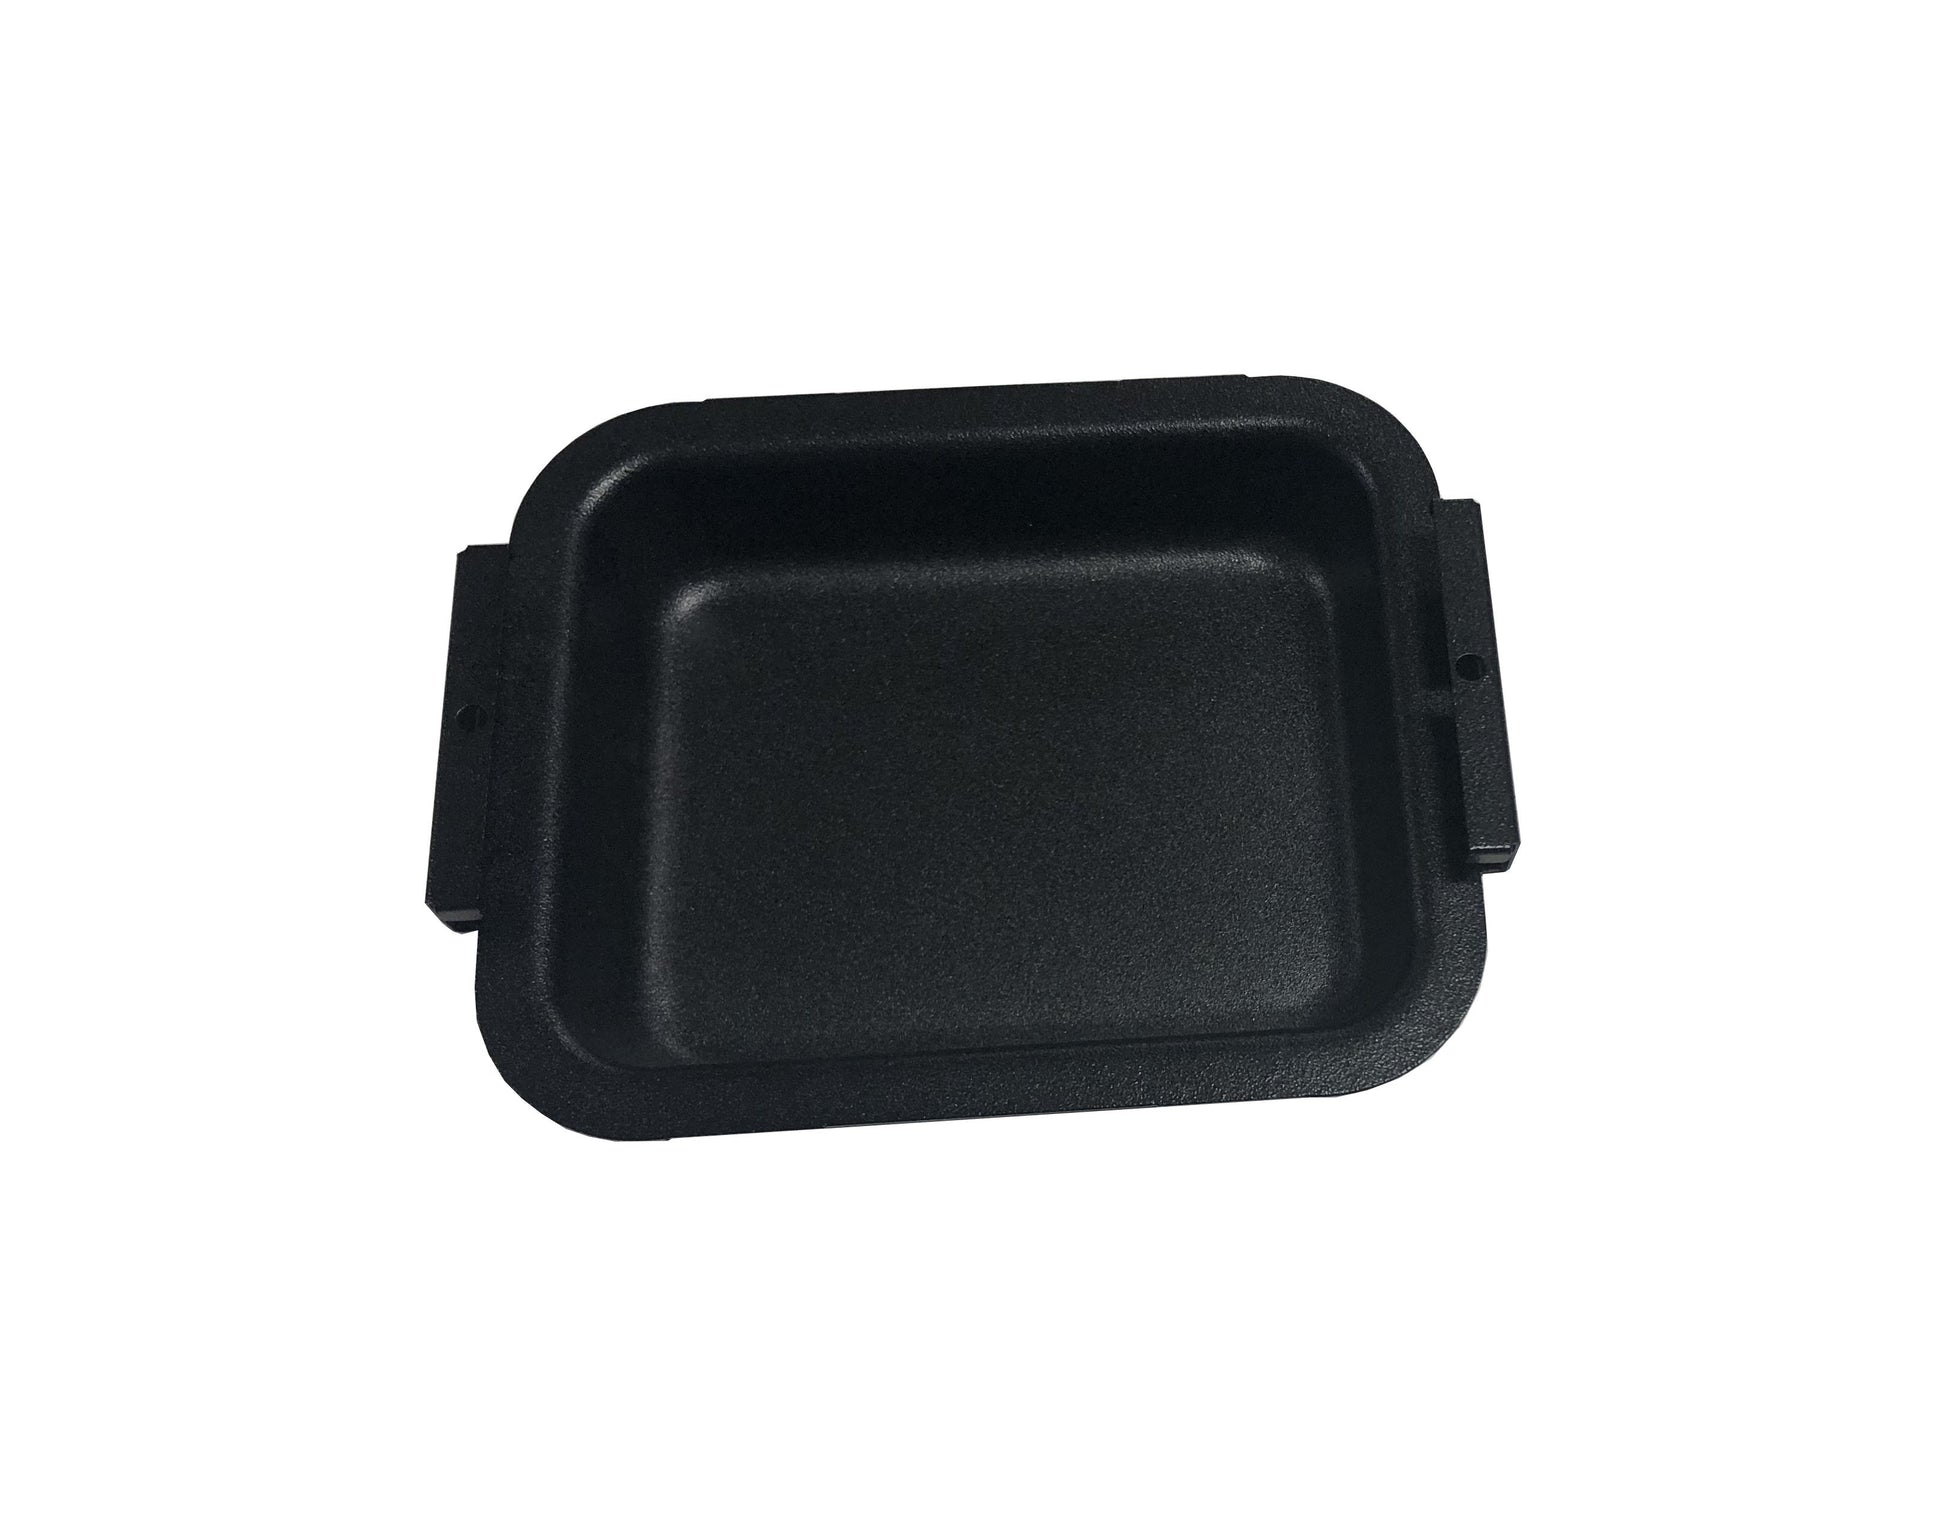 Broil King 52009901 grease pan. Acting as the “case” for the aluminum tray, this pan is a huge part of your BBQ’s cleaning & maintenance system. Available to order at Barbecues Galore: Burlington, Oakville, Etobicoke & Calgary.